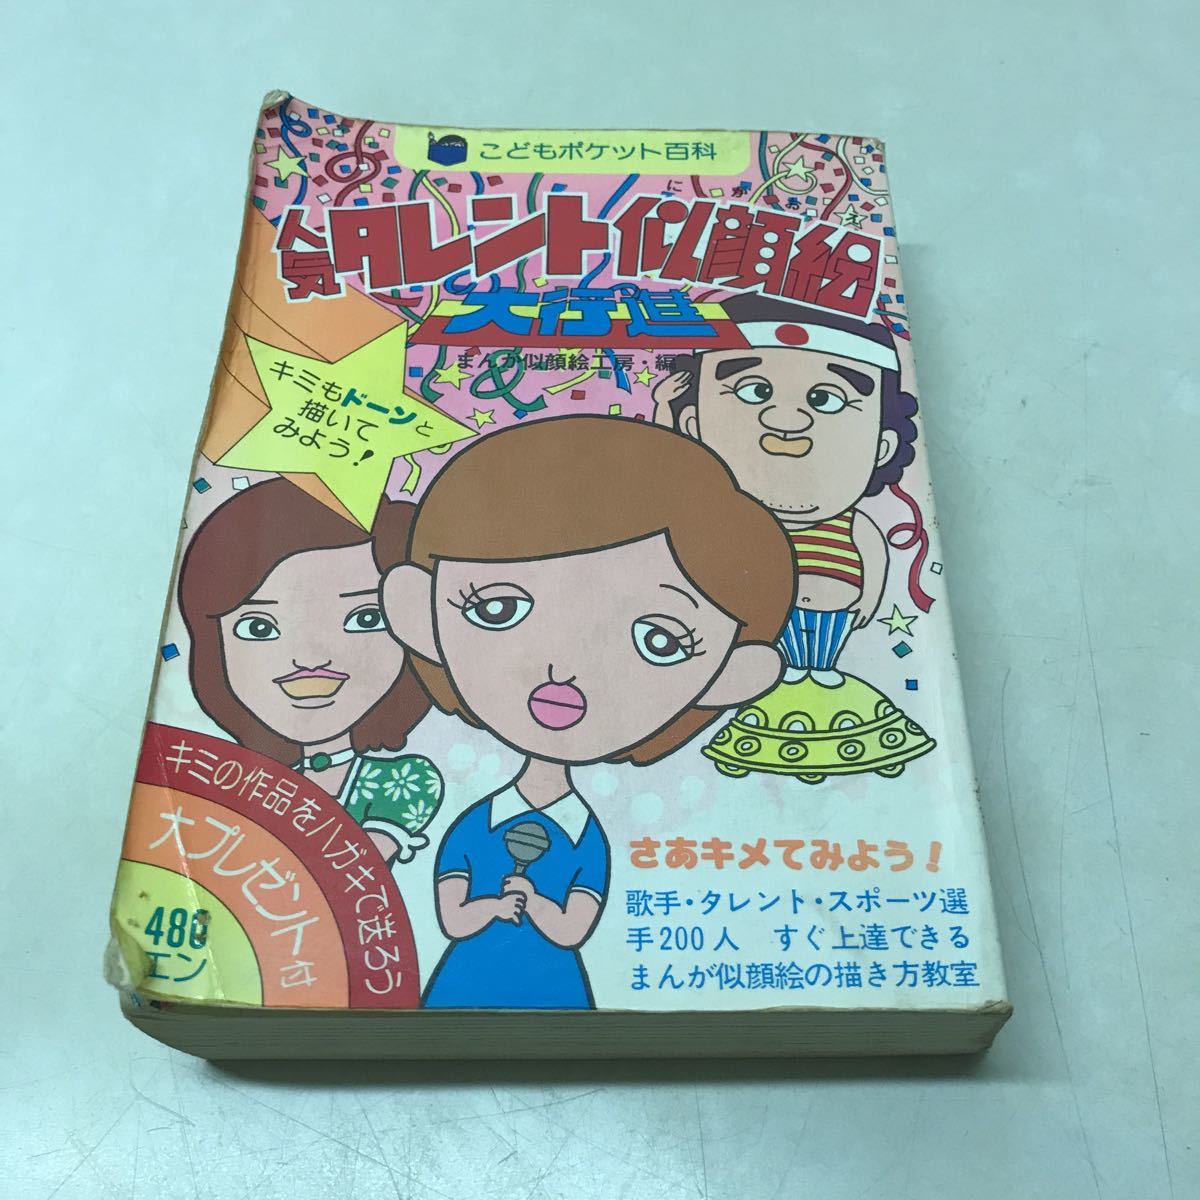 R01◆Popular Talent Caricature March Published in 1976 Jitsugyo no Nihon Sha Manga Caricature Studio Children's Pocket Encyclopedia Celebrity Illustration Retro 230809, children's books, picture book, children's literature, reading material, General reading material